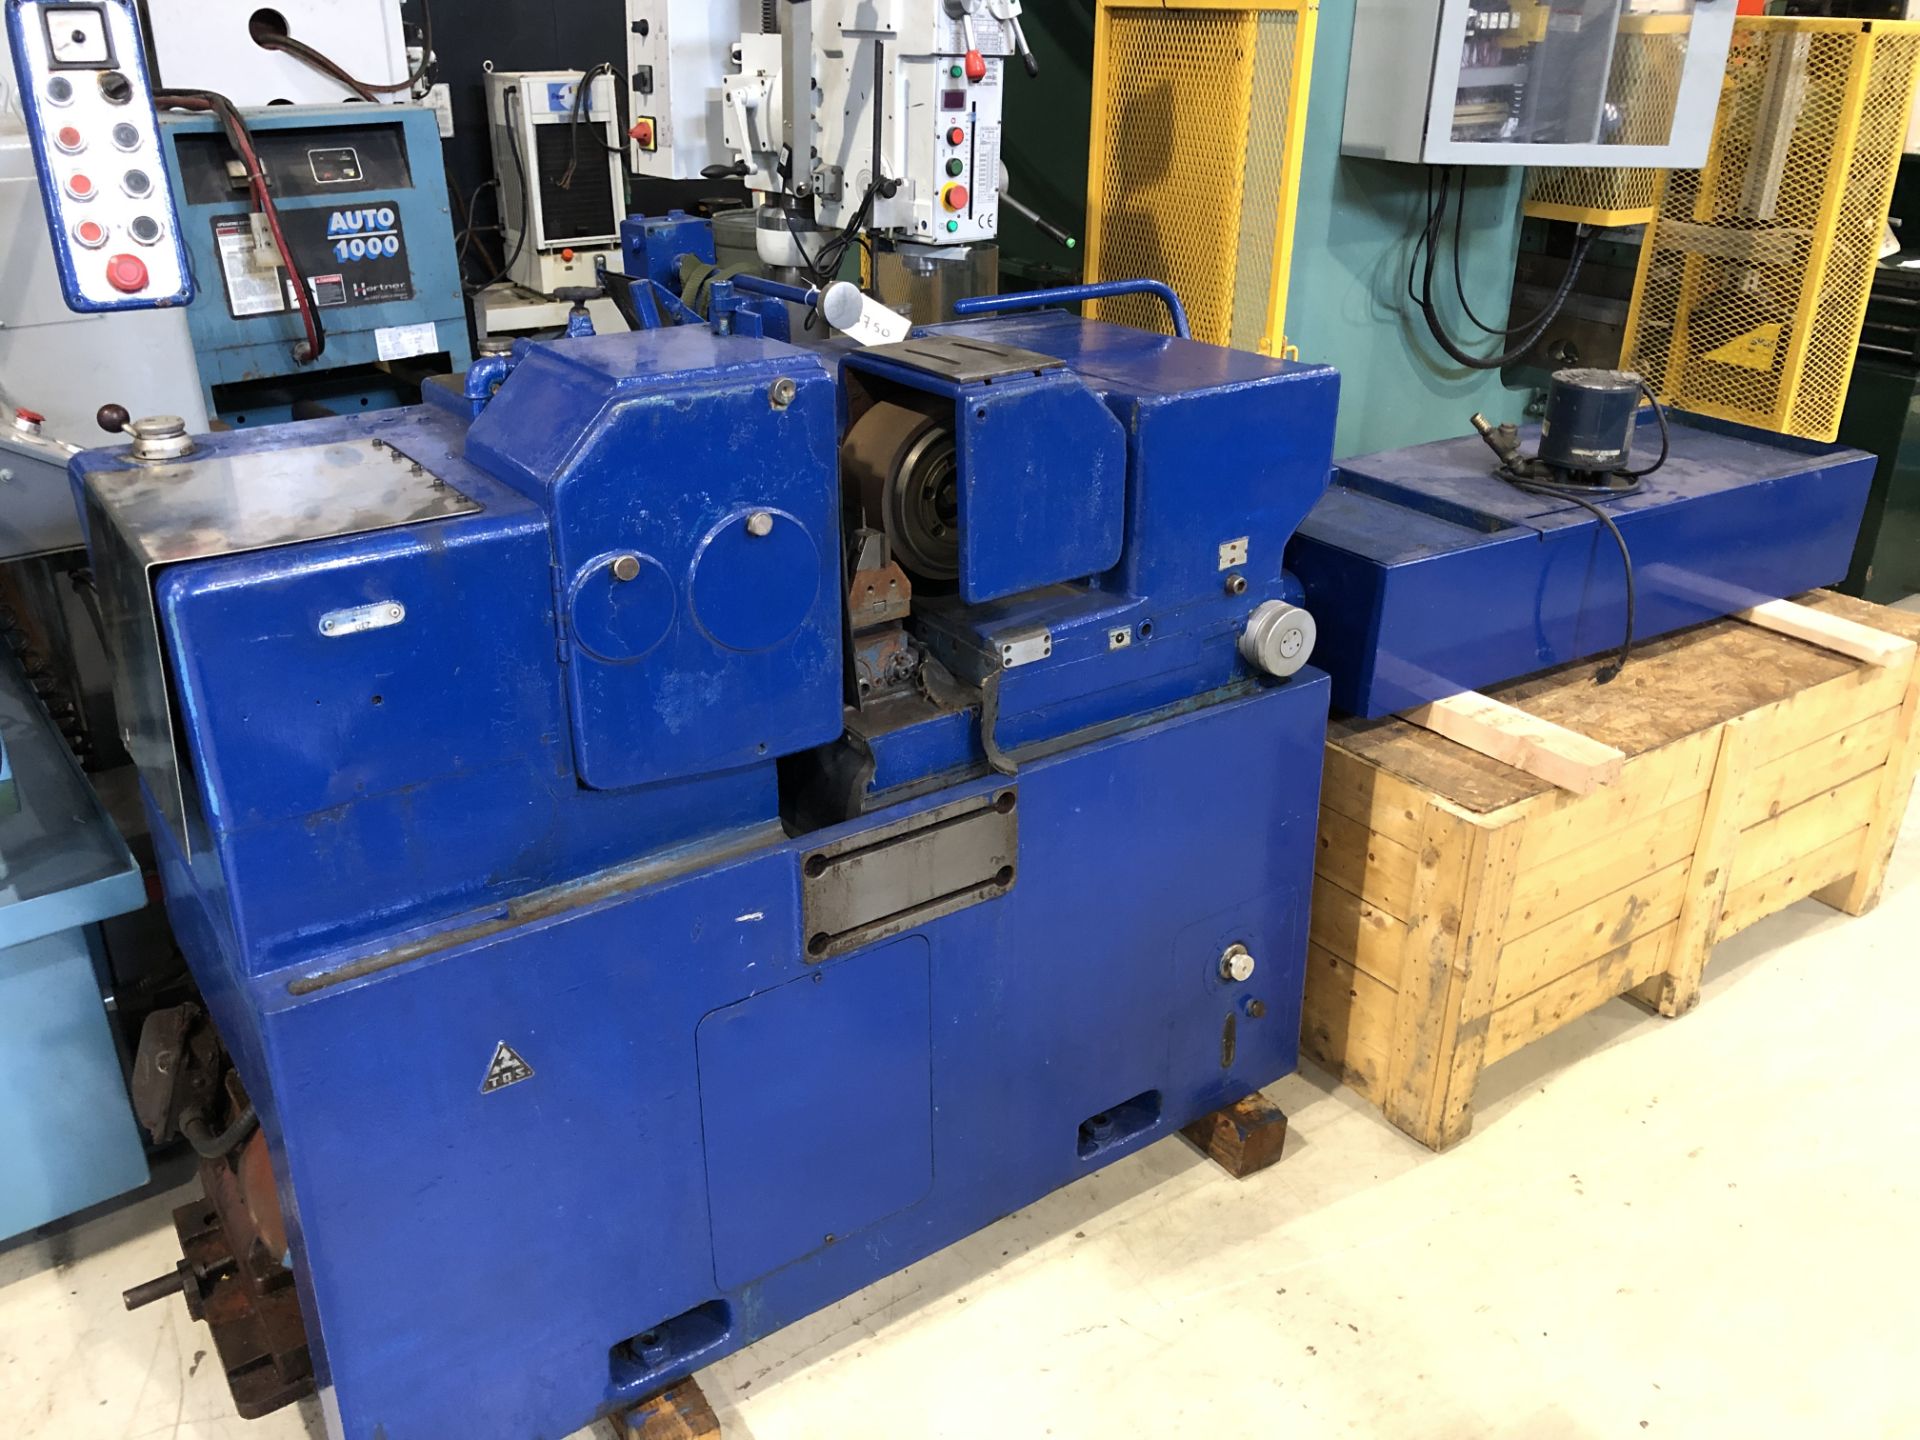 TOS CENTERLESS GRINDER, S/N 987, LOCATION, MONTREAL, QUEBEC - Image 4 of 4